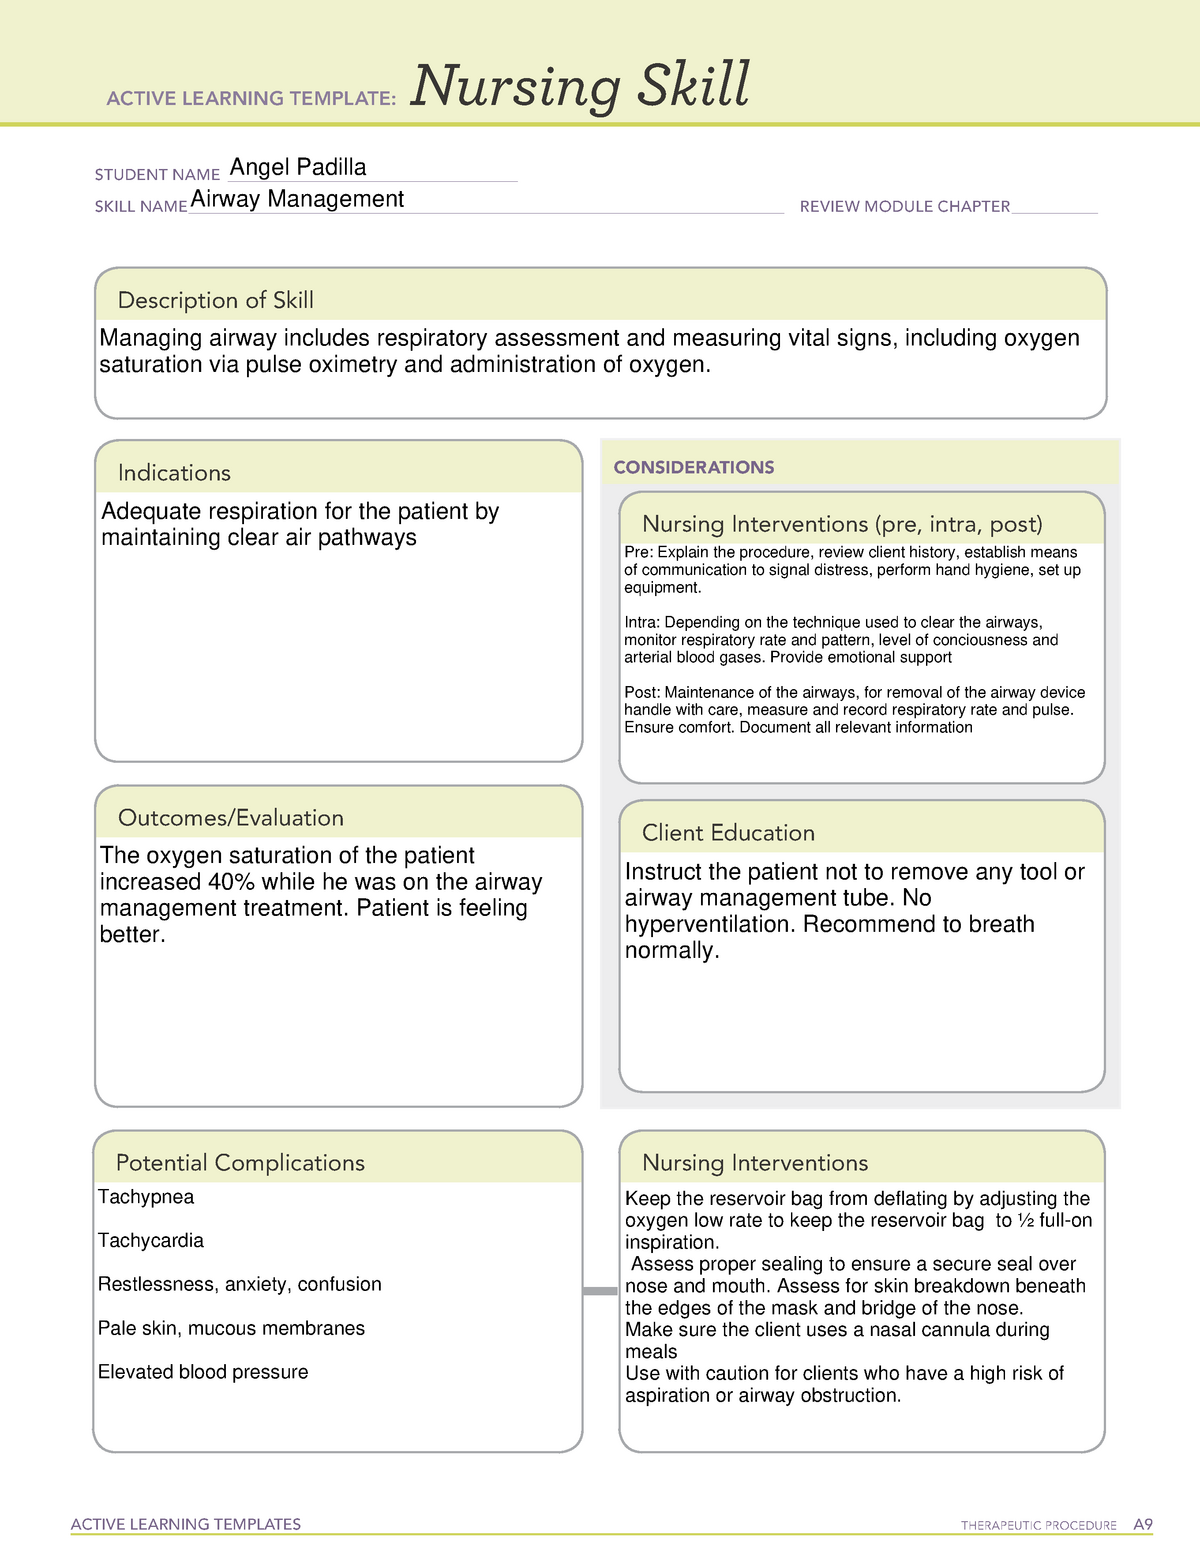 Airway management Skills Template ACTIVE LEARNING TEMPLATES